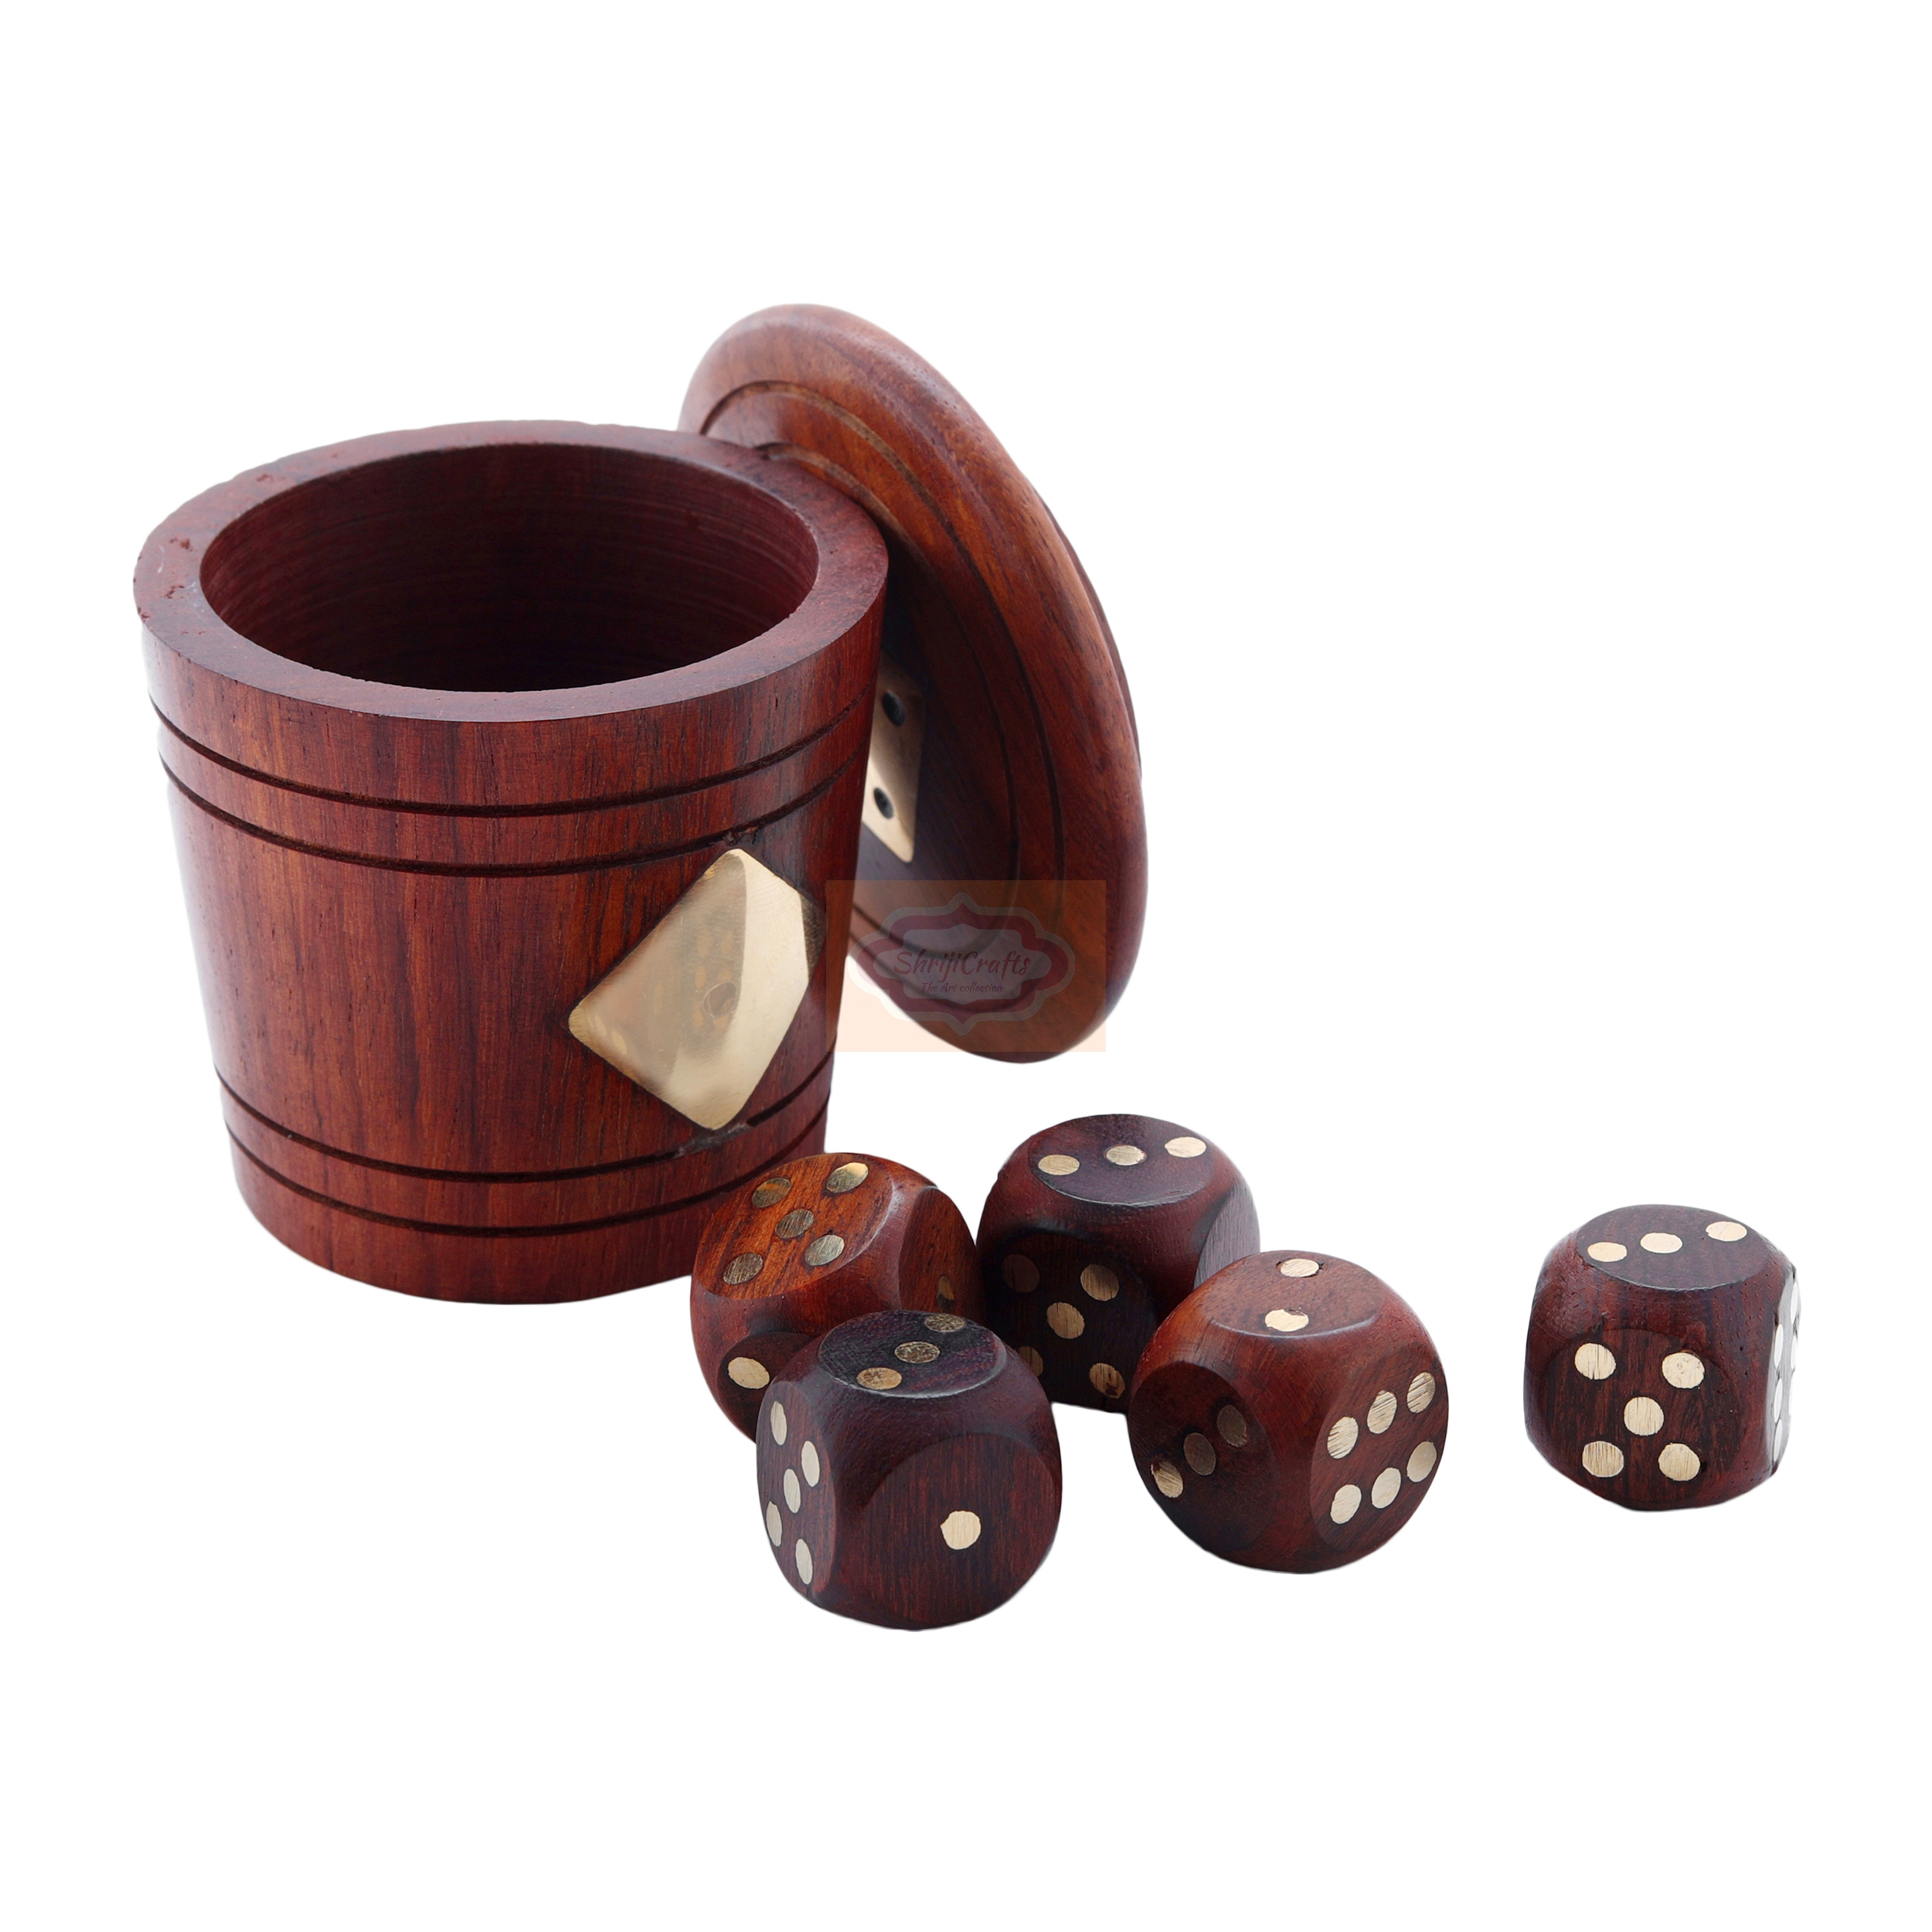 Shrijicrafts | ShrijiCrafts Handmade wooden Dice and Box Set with 5 dice